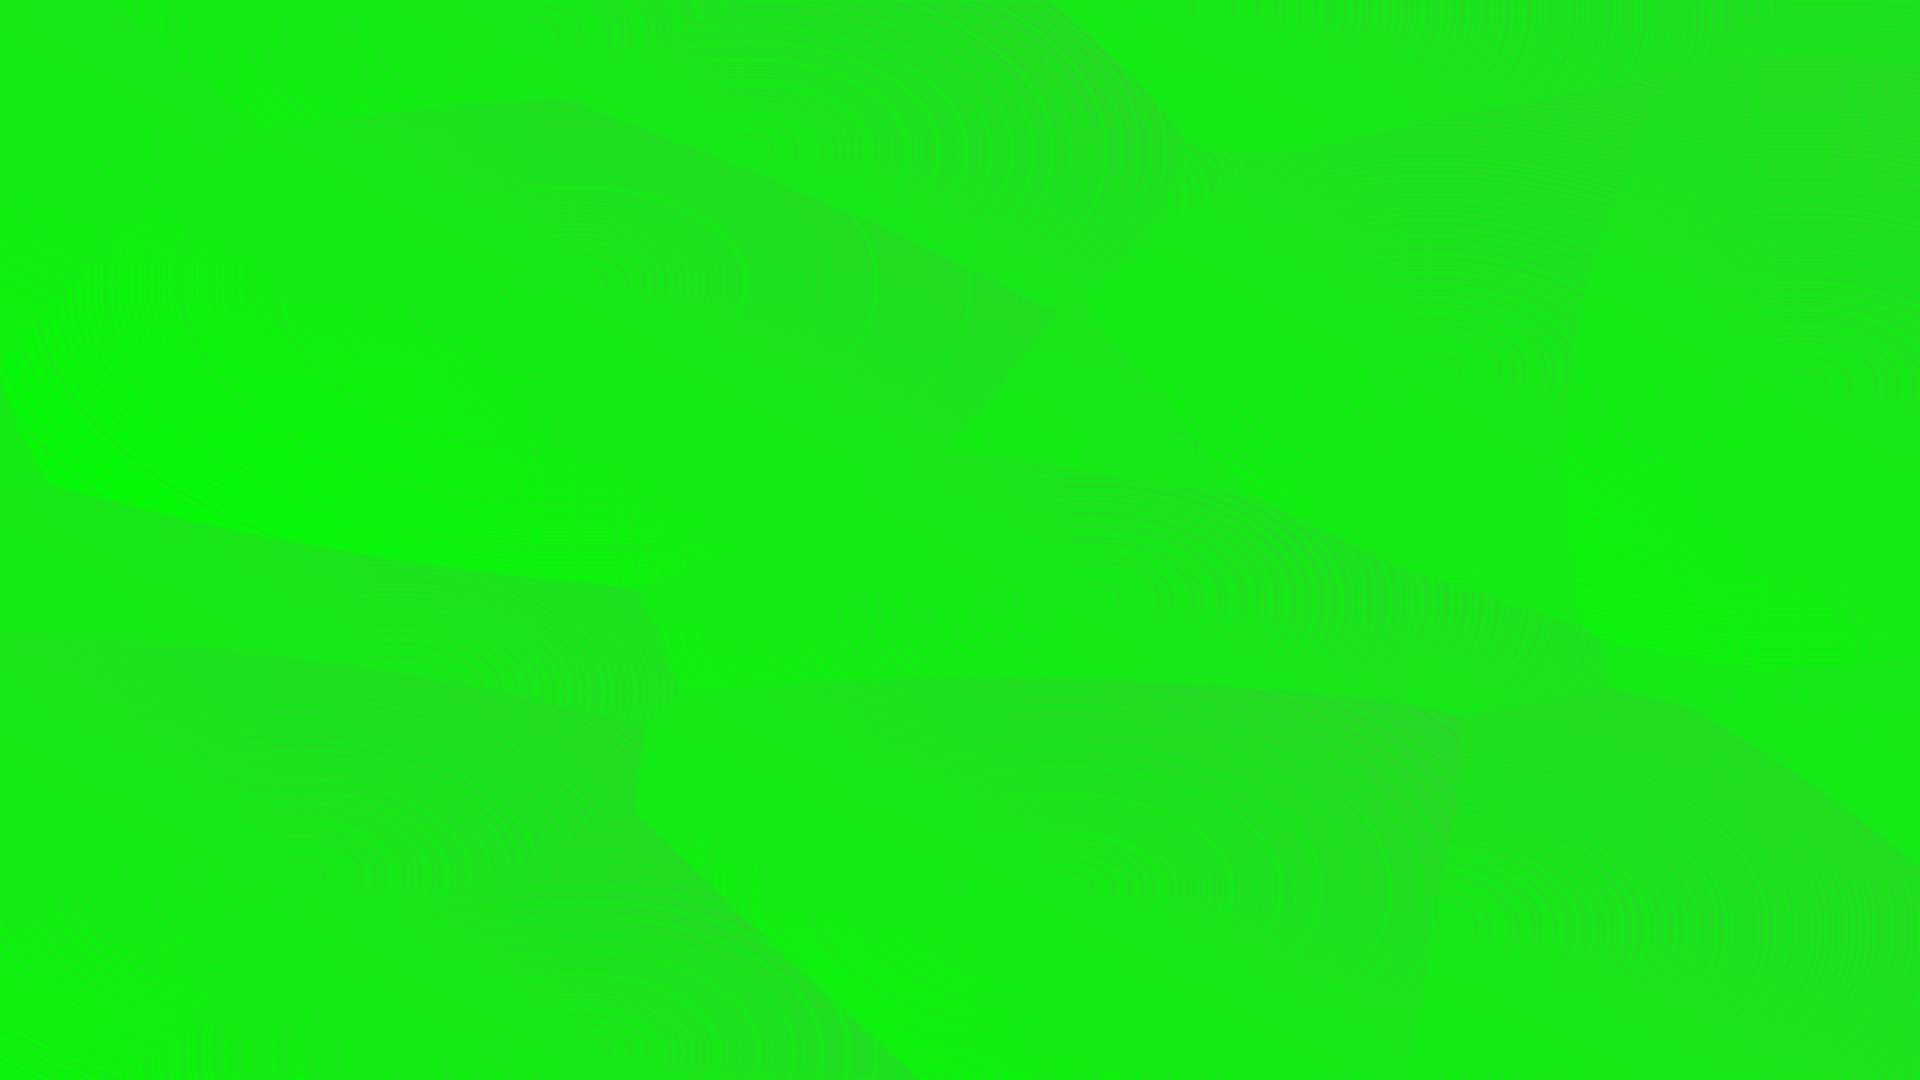 Green Zoom Background Image